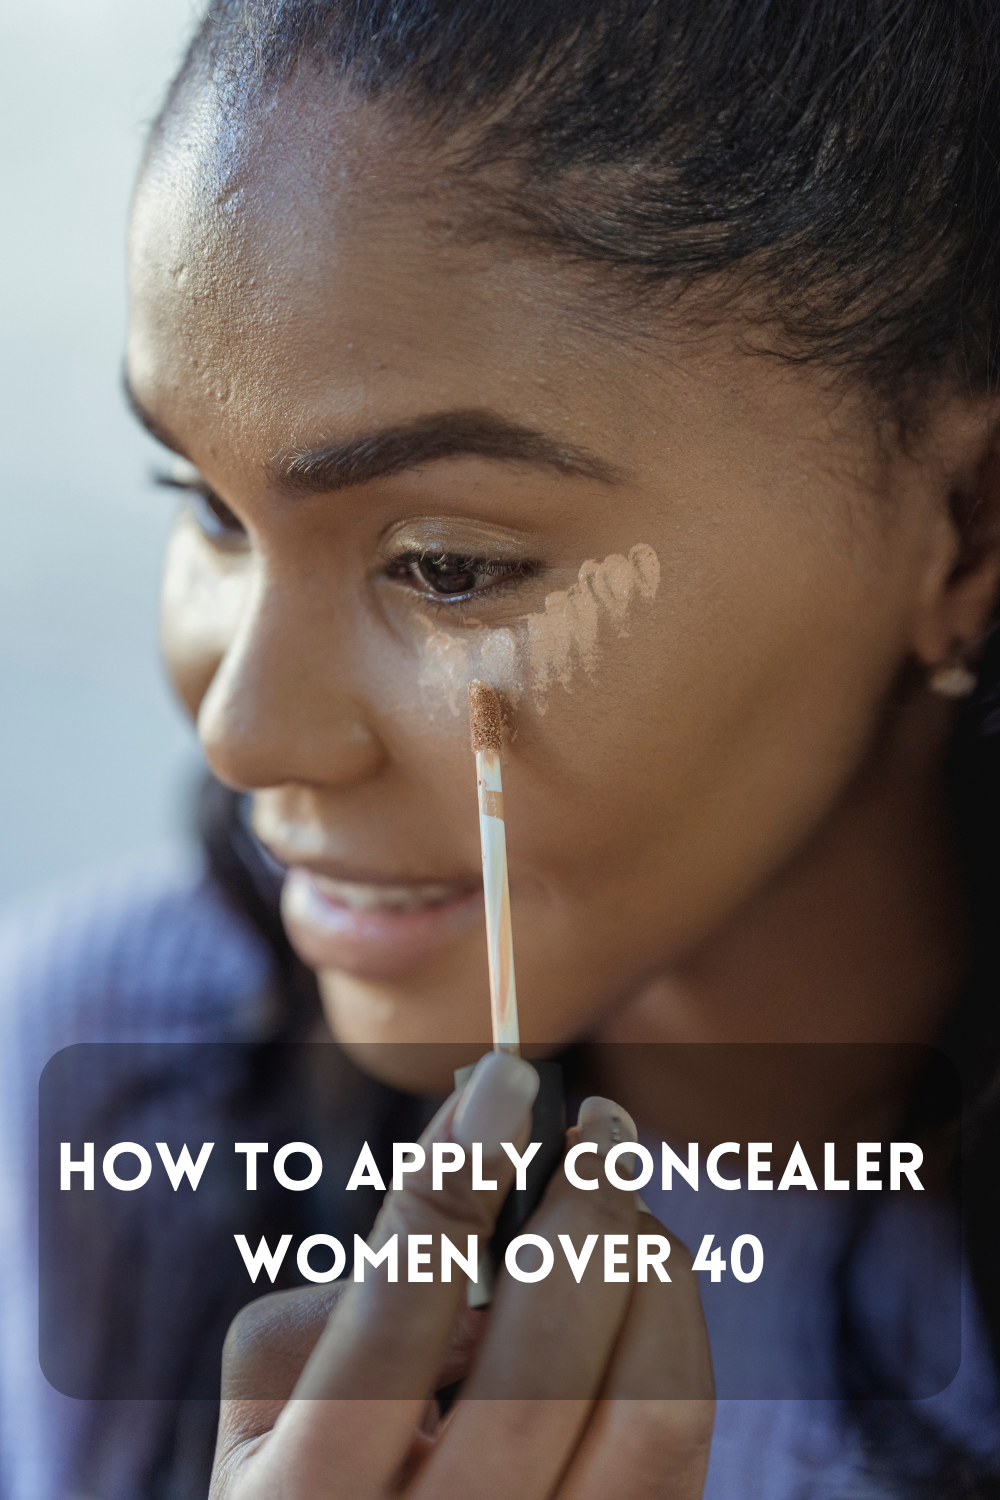 How To Apply Your Concealer For Women Over 40